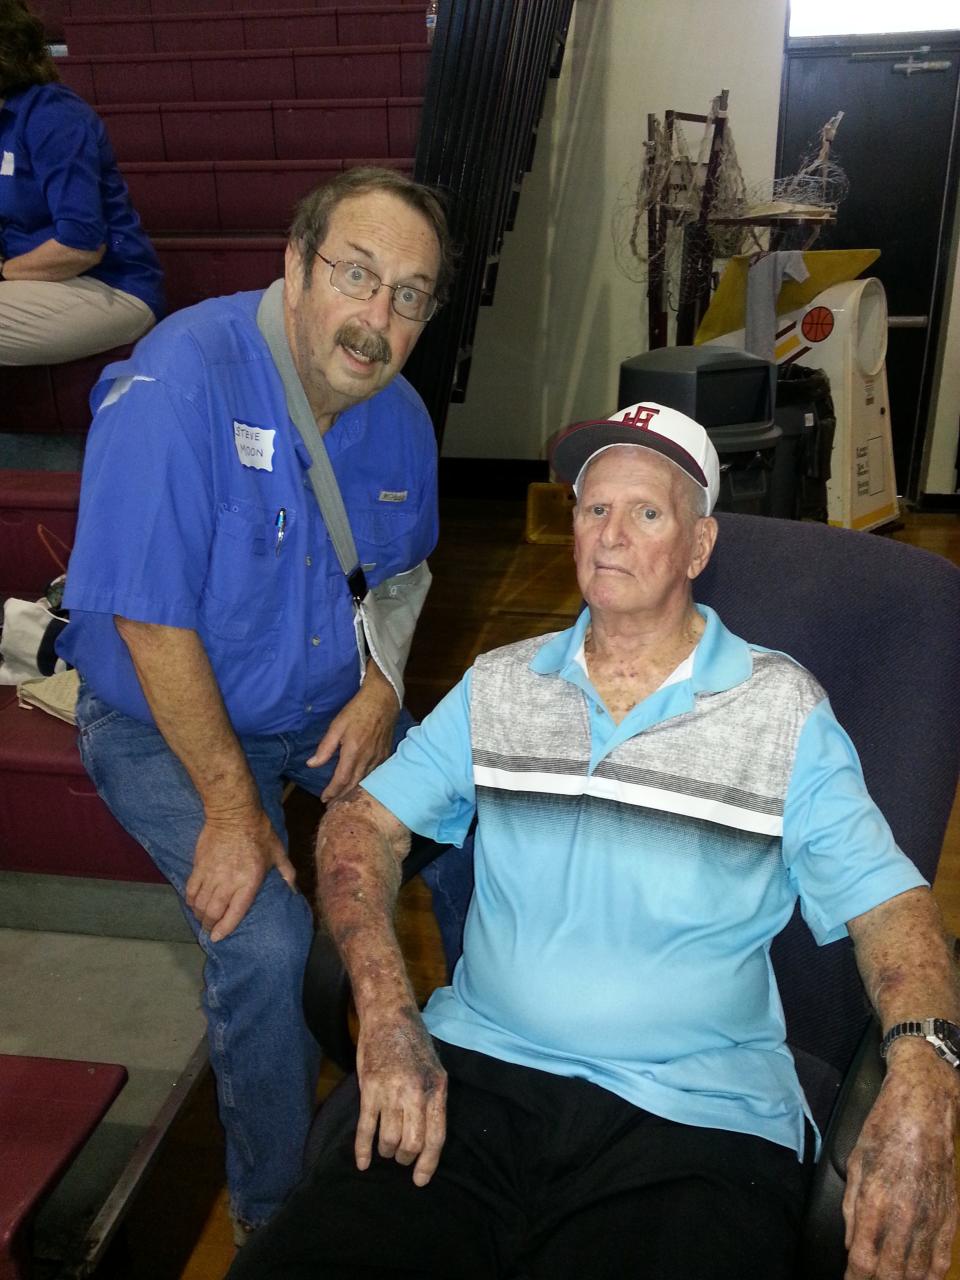 Steve Moon with Bob Albertson at Albertson's 90th birthday party at Florida High's gym.